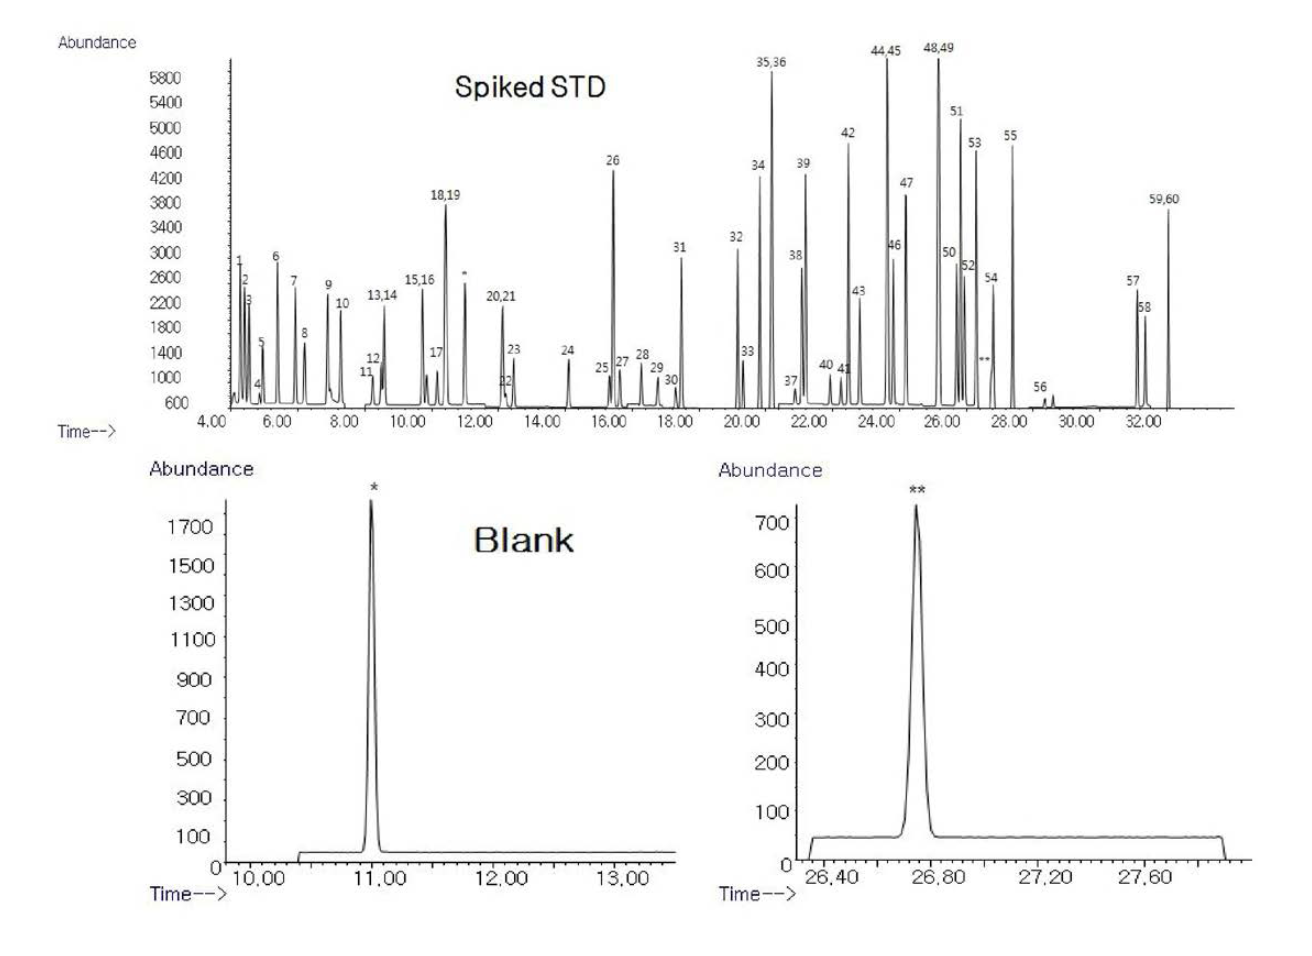 Headspace-GC-MS total ion chromatograms of the extracts of spiked volatile organic compounds (10 Ug/L) and blank.